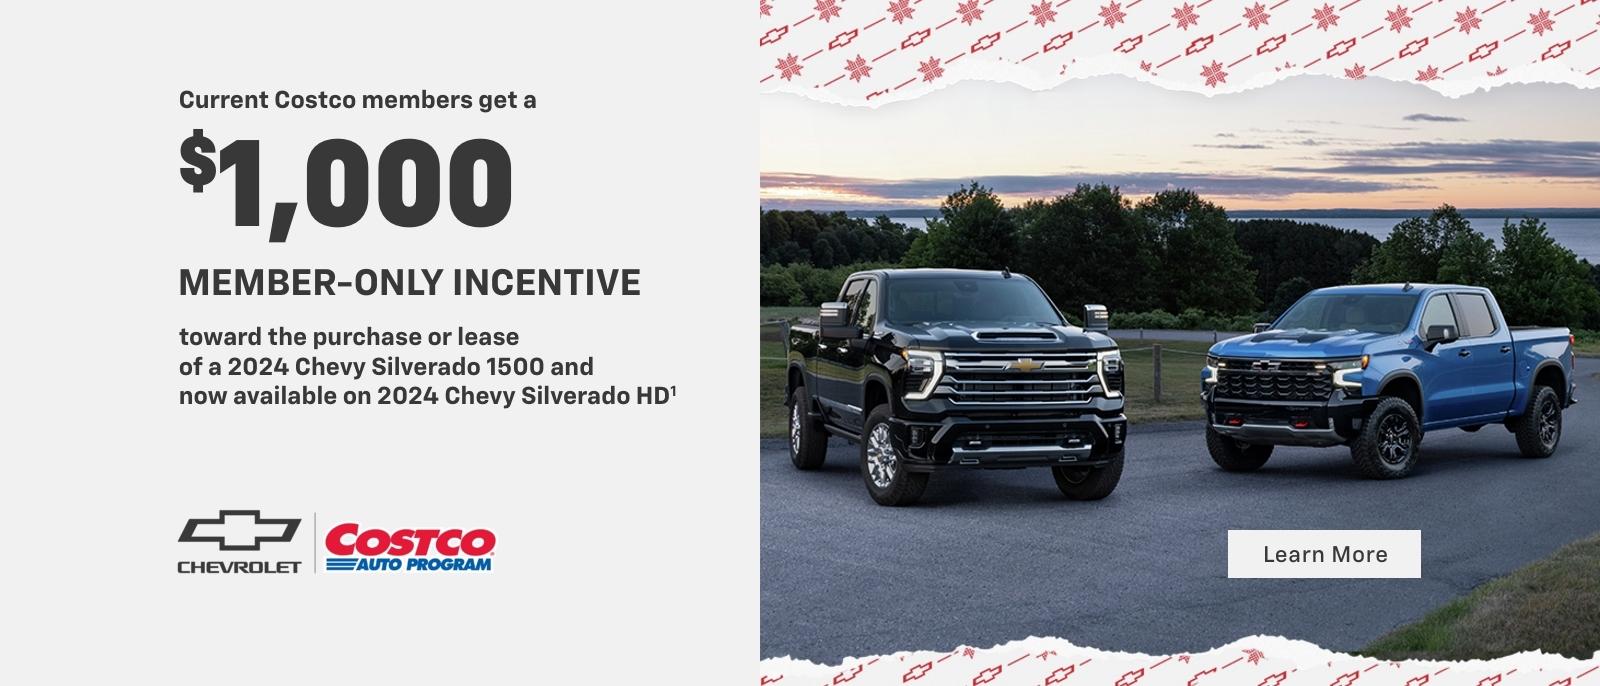 Current Costco members get a $1,000 member-only incentive toward the purchase or lease of a 2024 Chevy Silverado 1500 and Silverado HD.